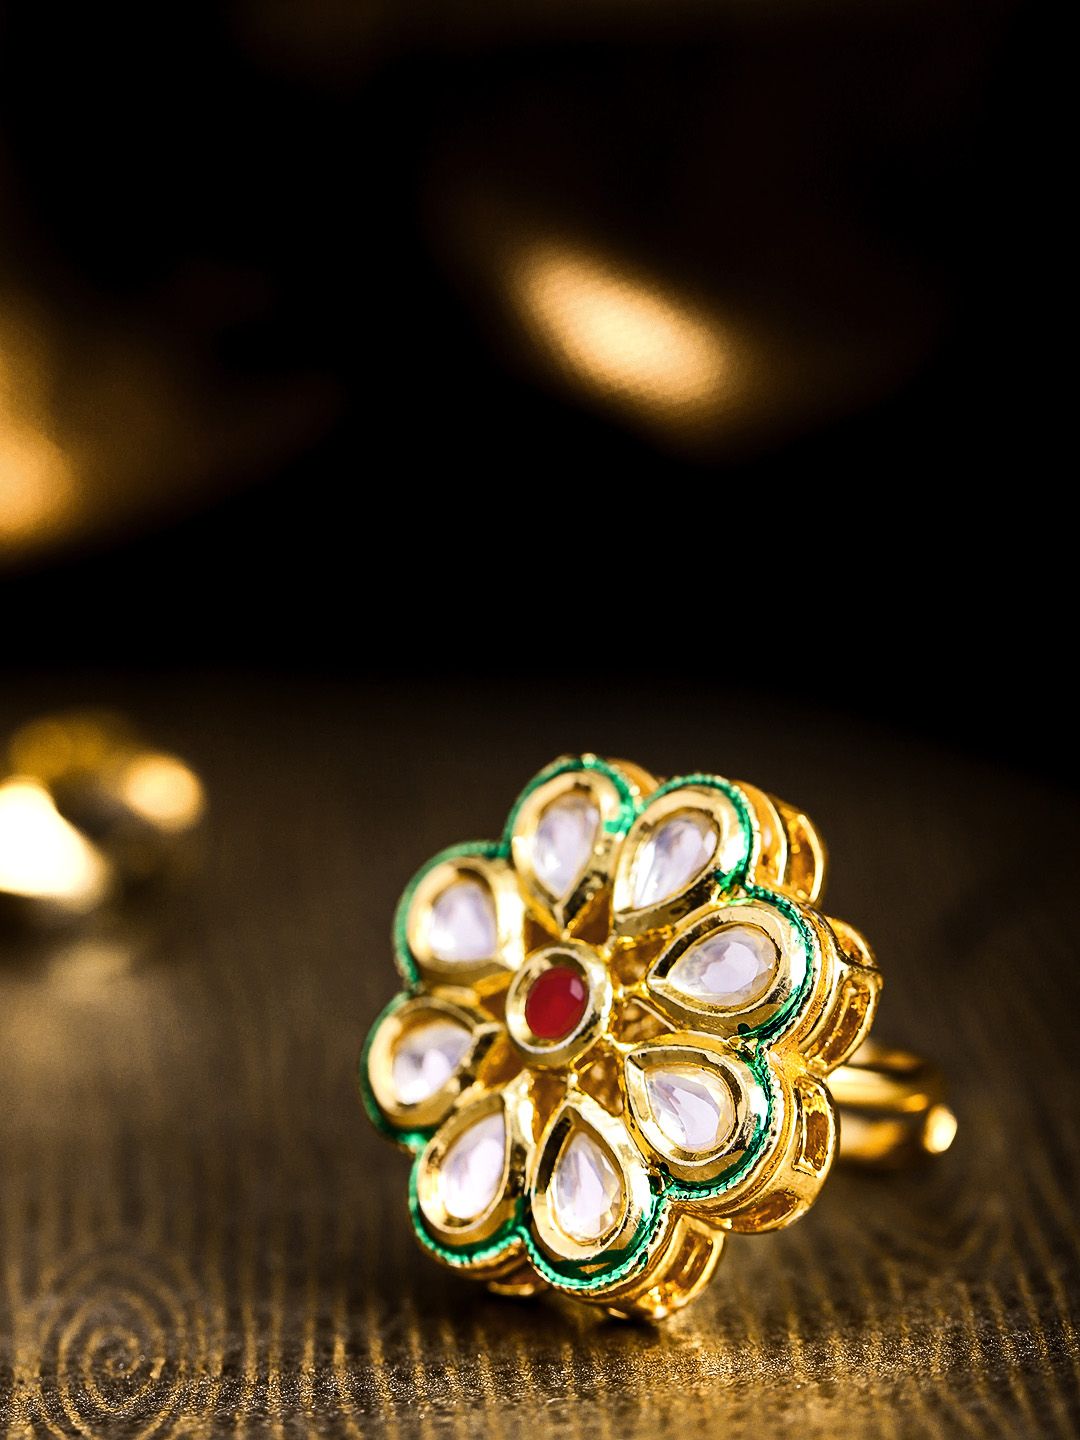 Priyaasi Red Gold-Plated Kundan-Studded Handcrafted Floral Shaped Adjustable Finger Ring Price in India